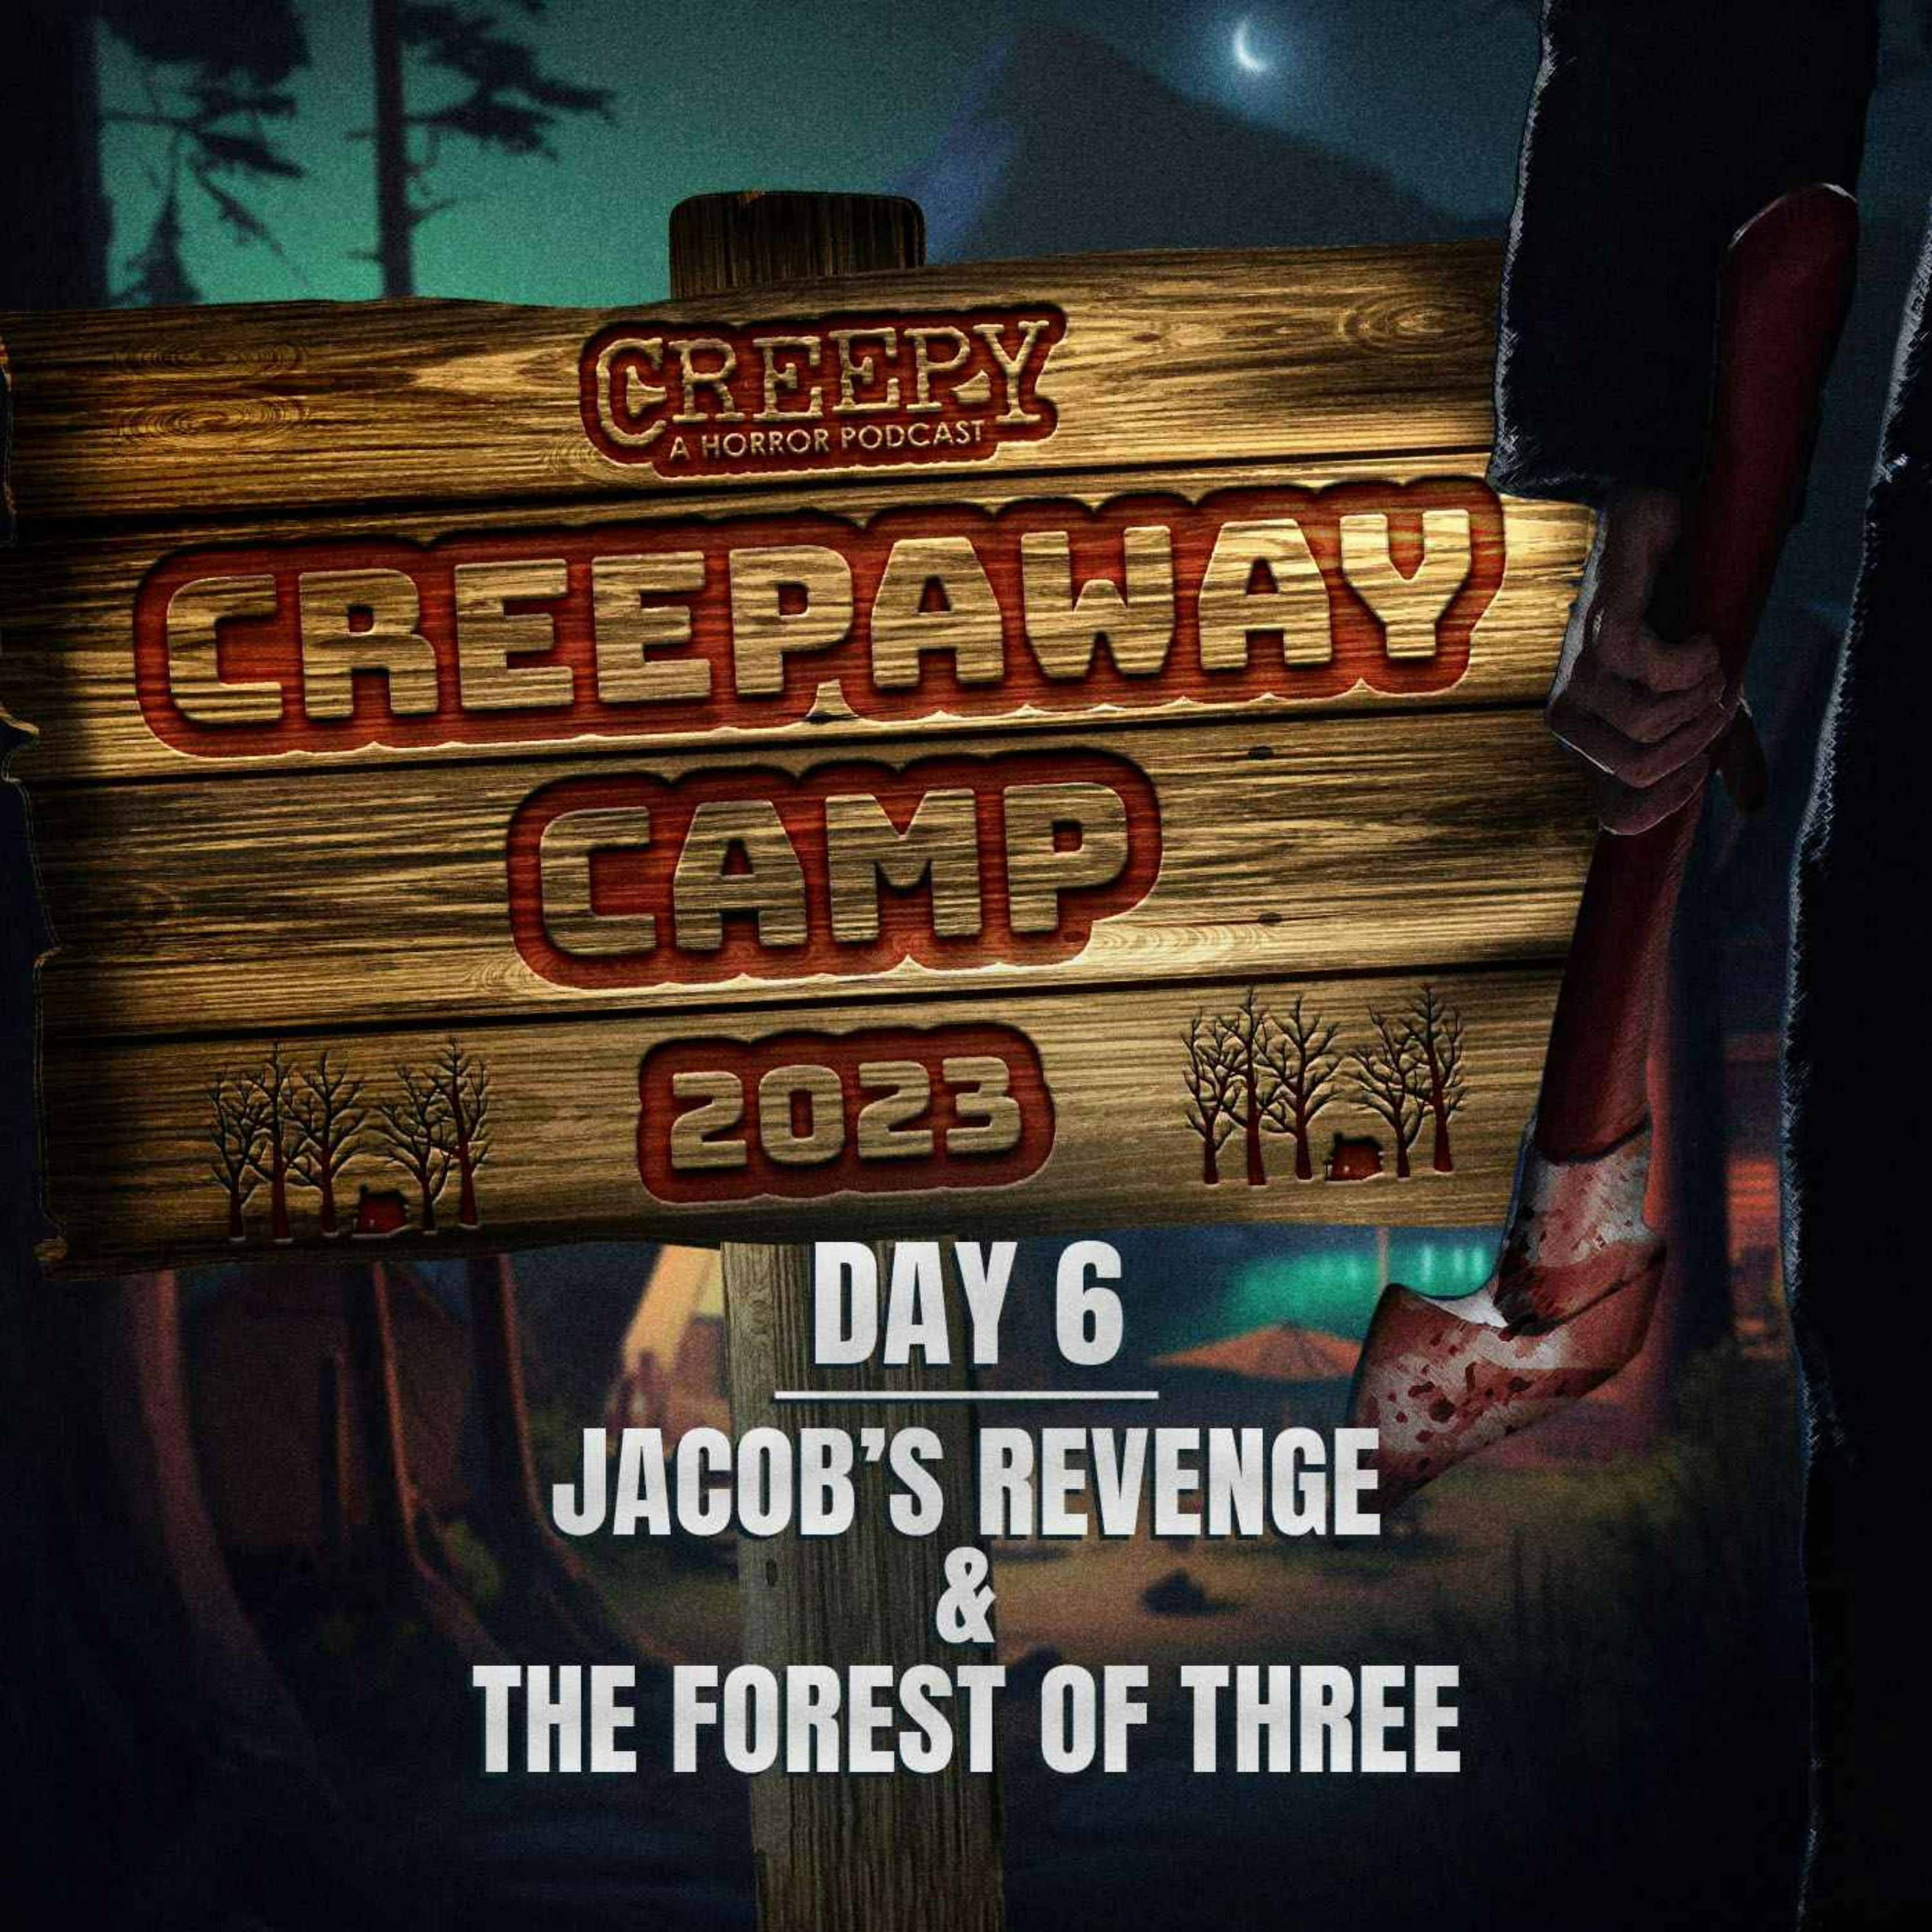 Creepaway Camp 2023 - Day 6: Jacob’s Revenge & The Forest of Three